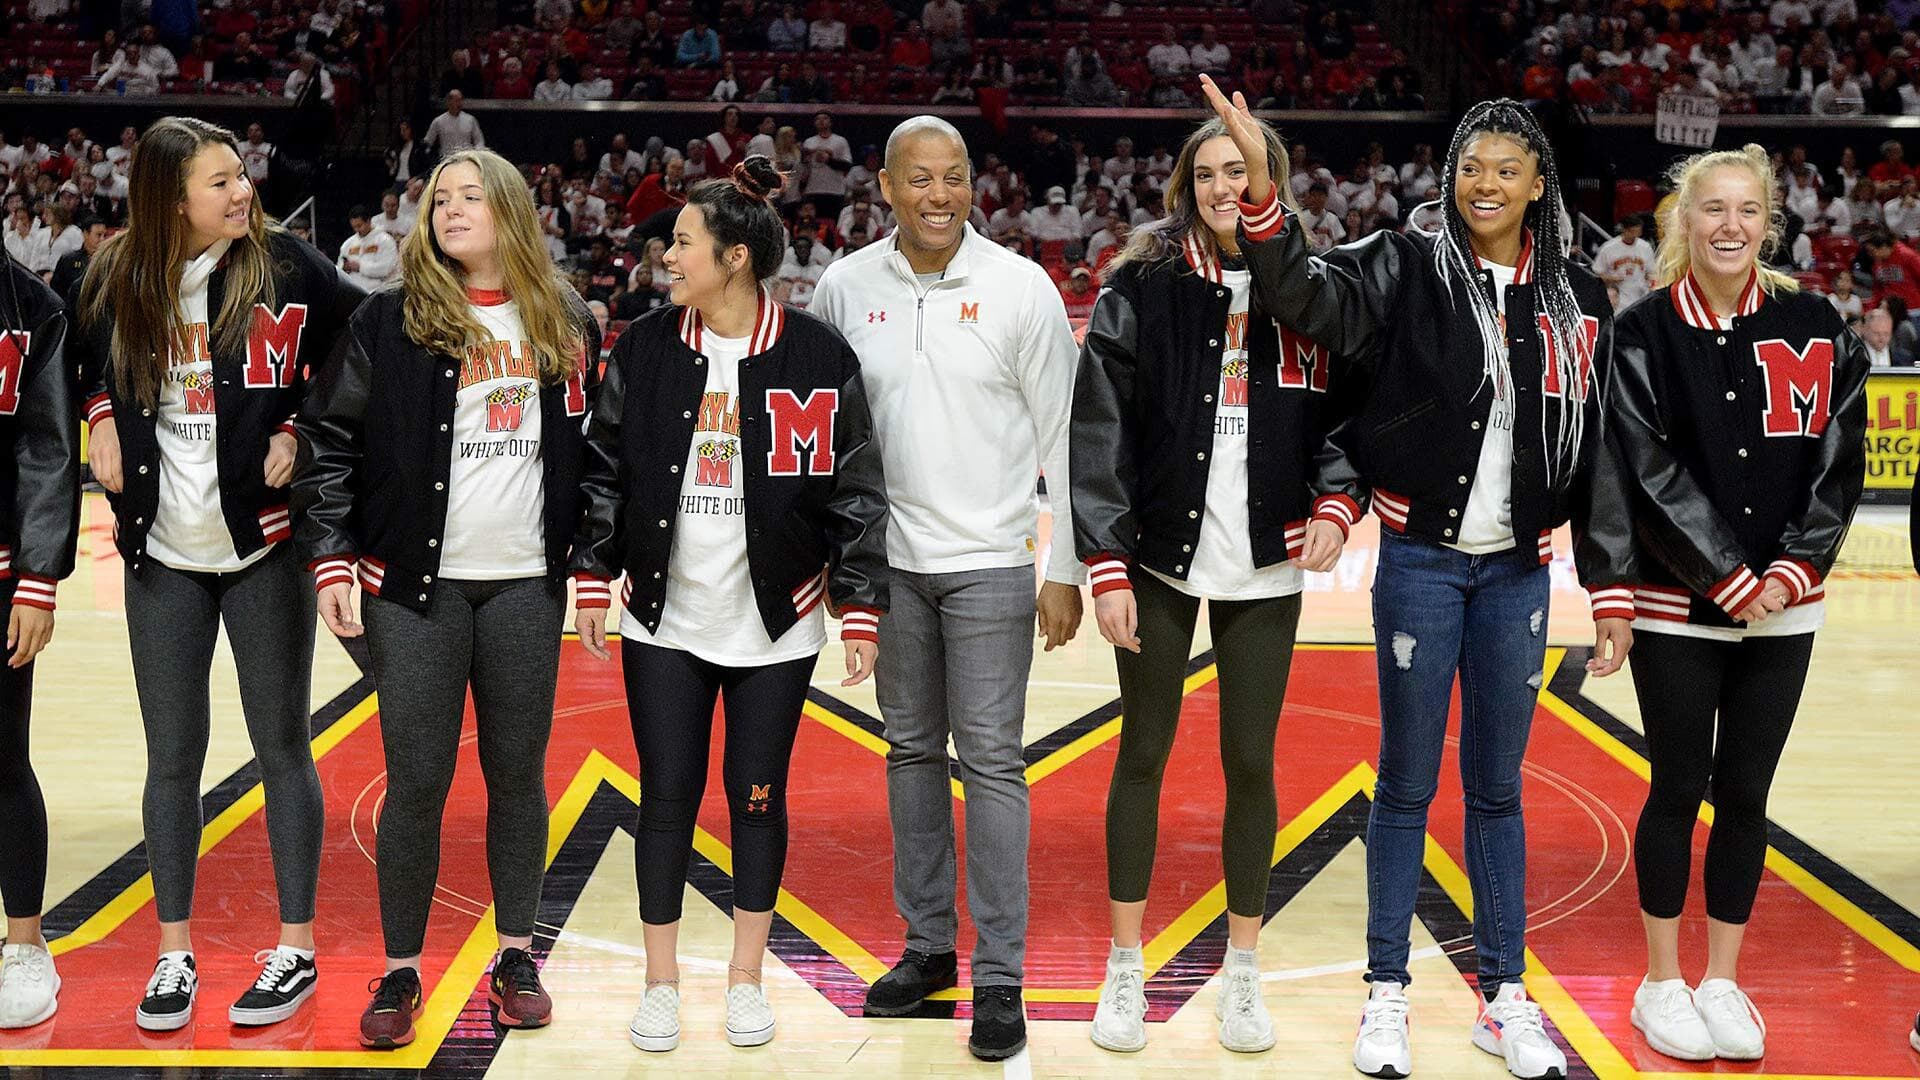 women's basketball players standing with Damond Evans in the center